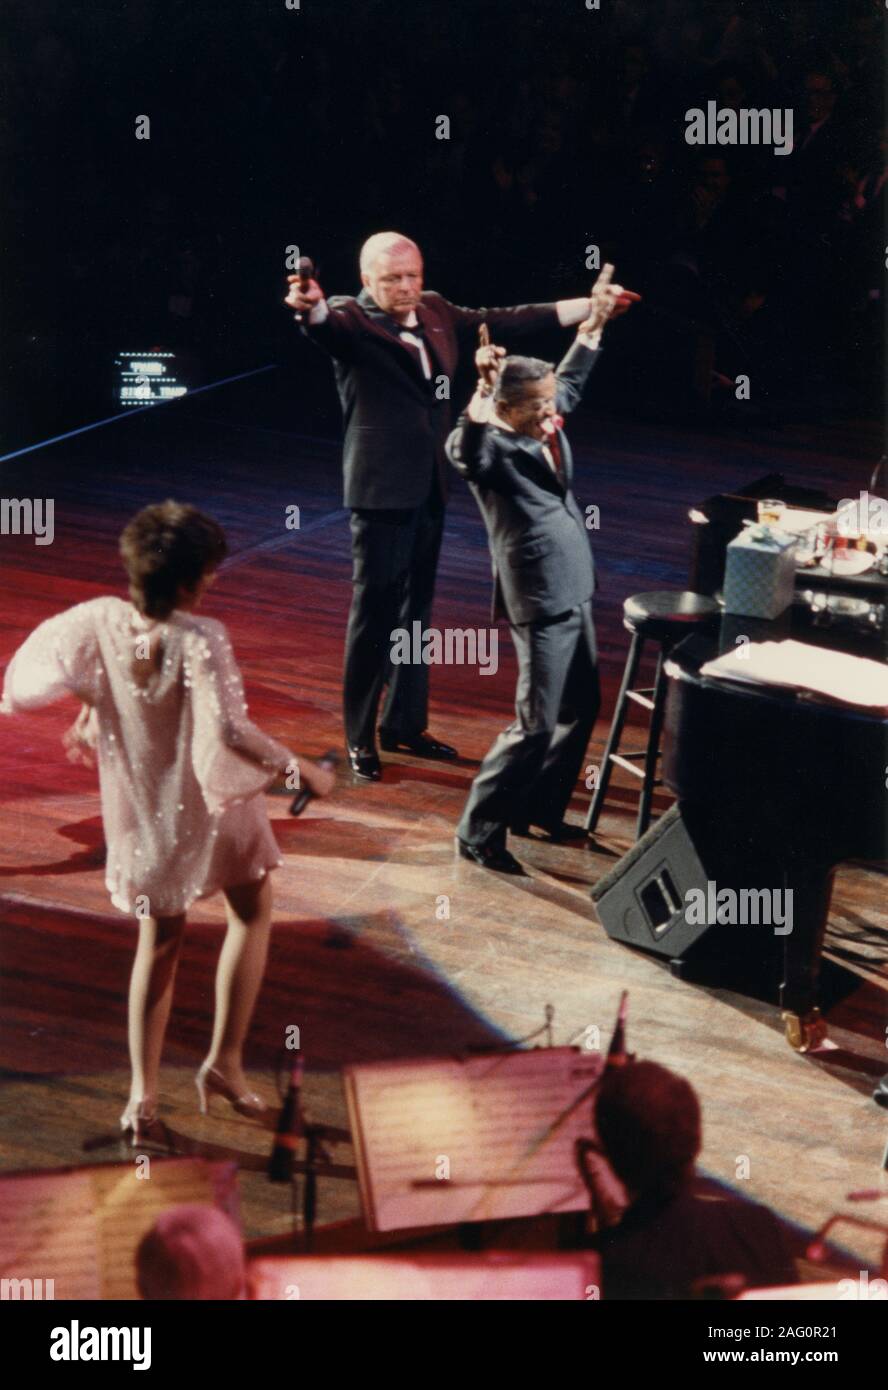 Frank Sinatra, Sammy Davis Jr, Liza Minnelli, Royal Albert Hall, London 1989. In April 1989, three of the greatest icons of American popular music, Frank Sinatra, Liza Minnelli and Sammy Davis Jr, came together in Frank, Liza and Sammy: The Ultimate Event. Stock Photo